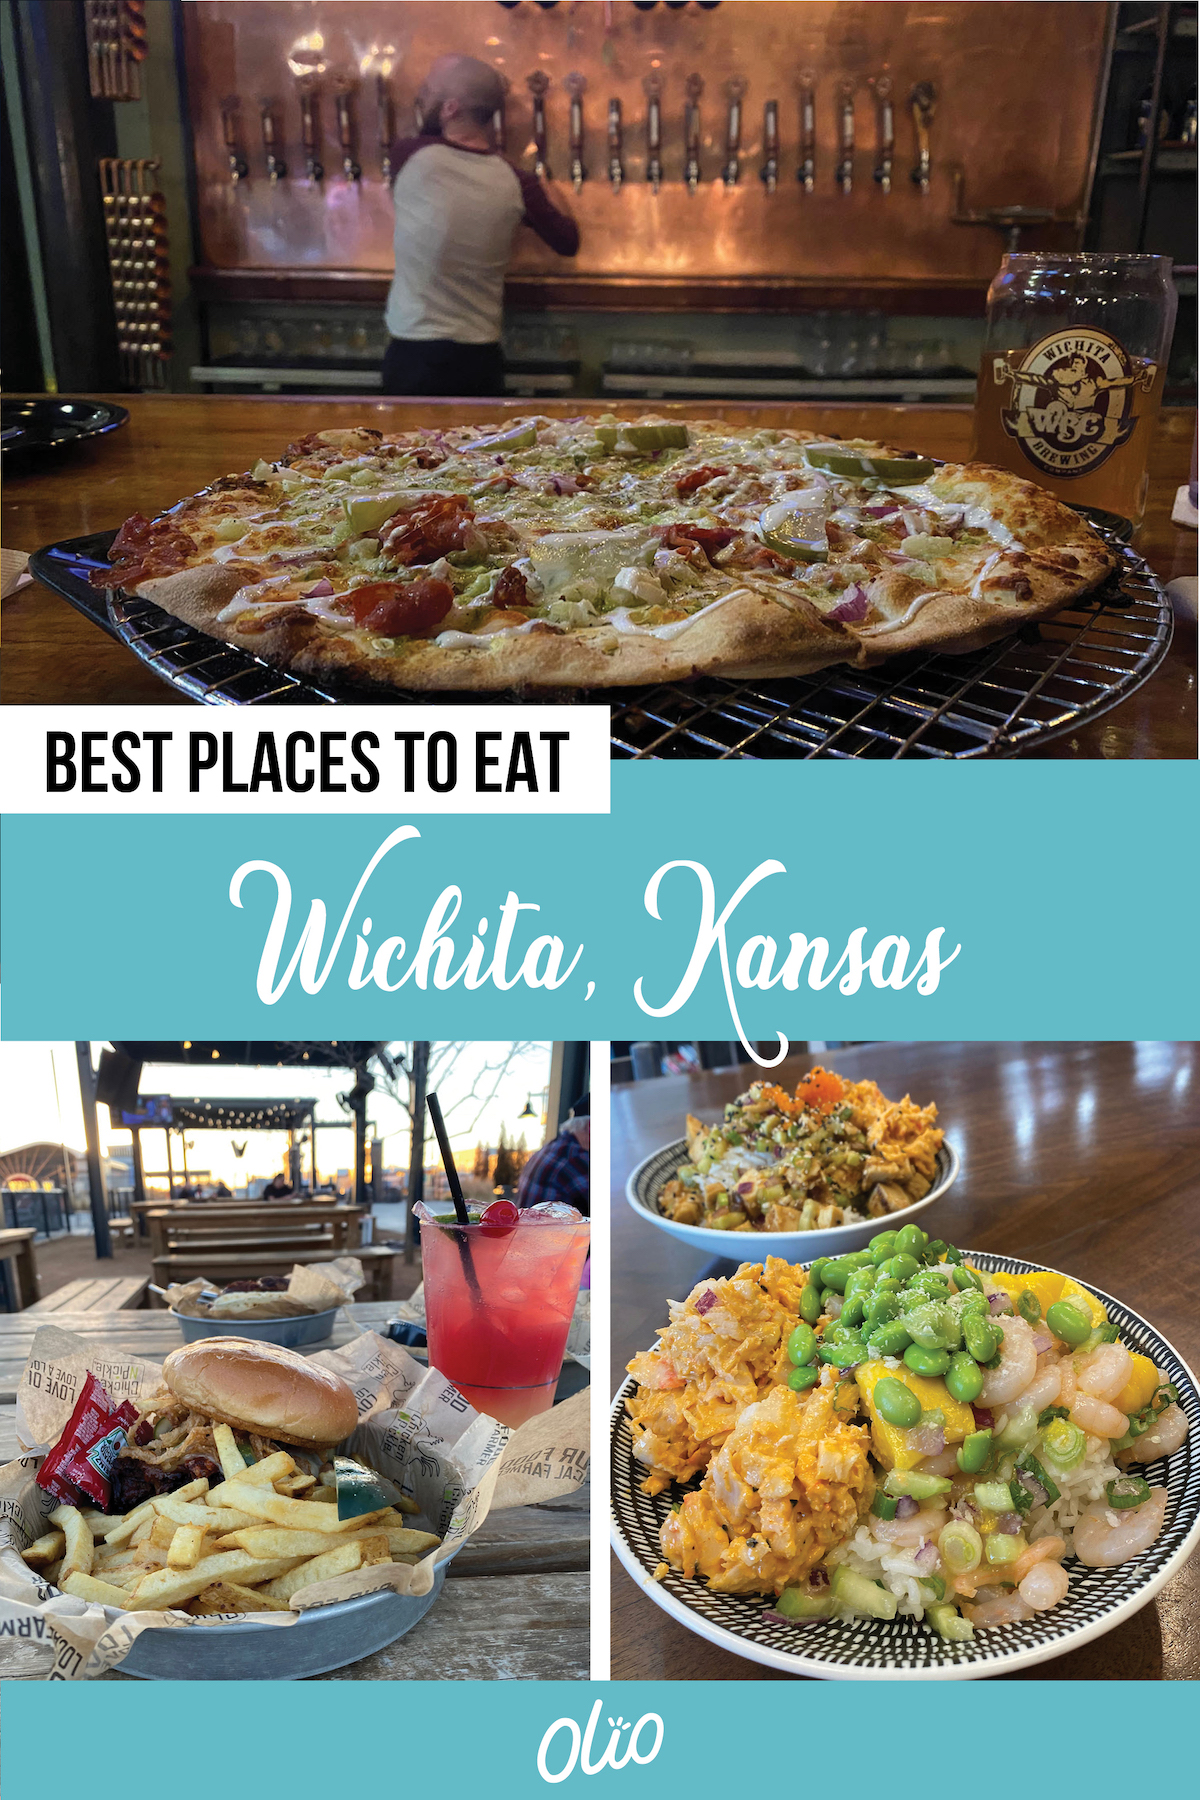 There are so many incredible places to eat in Wichita, Kansas! From breweries and bakeries to coffee shops and courtyard cafes, there are lots of options to enjoy. Whether you're a local or just visiting for the weekend, this comprehensive post includes 20+ places you need to grab a bite to eat at ASAP.